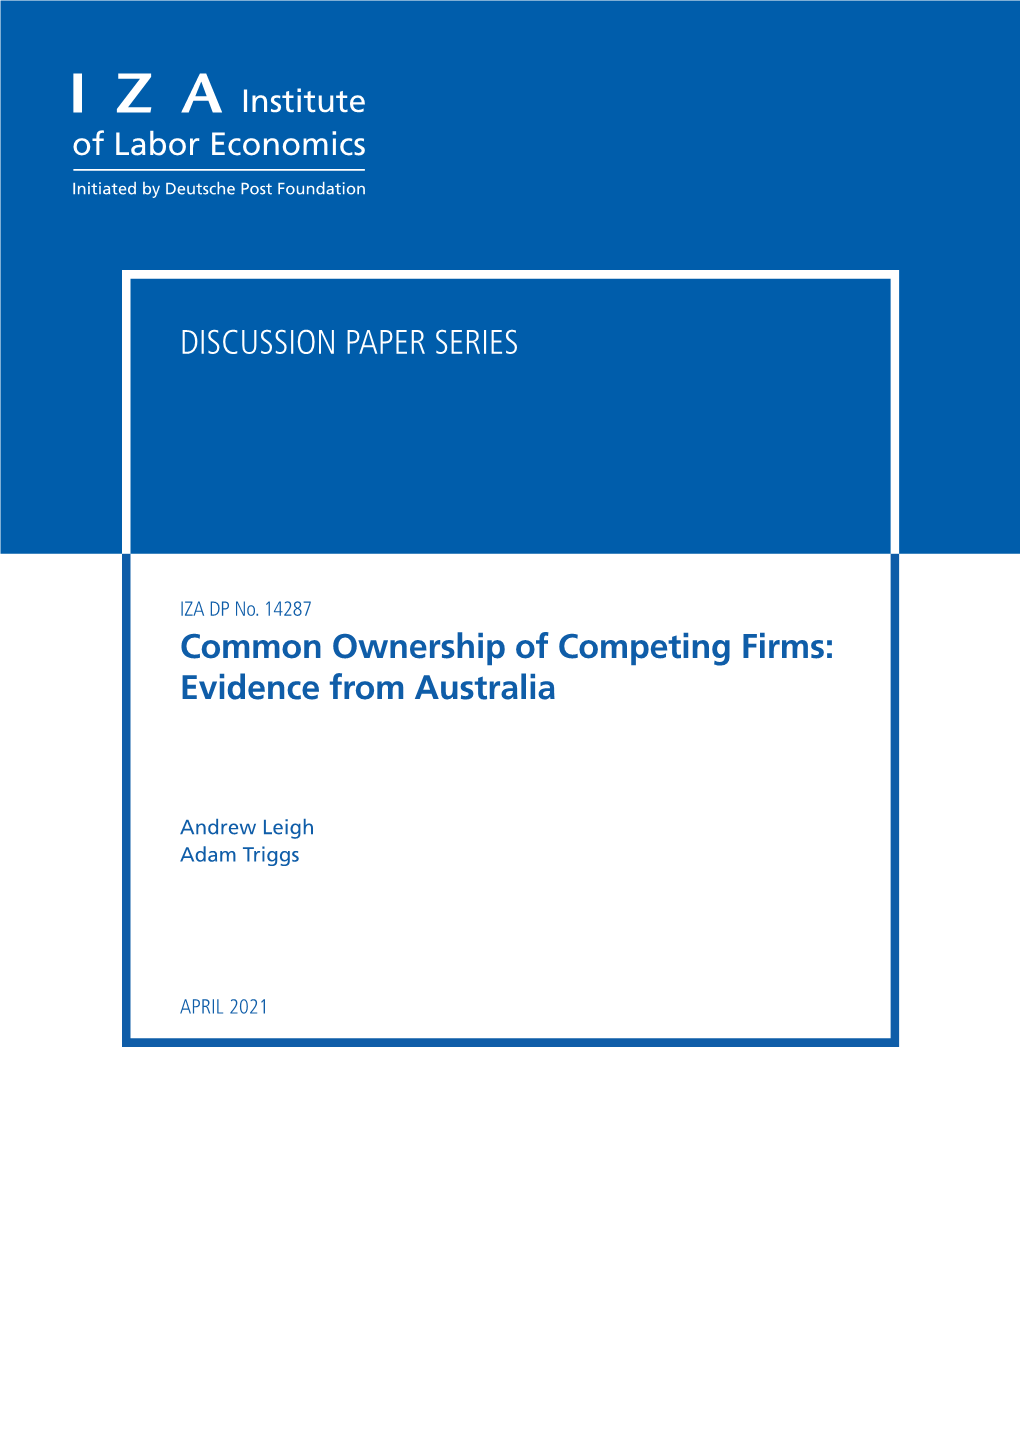 Common Ownership of Competing Firms: Evidence from Australia